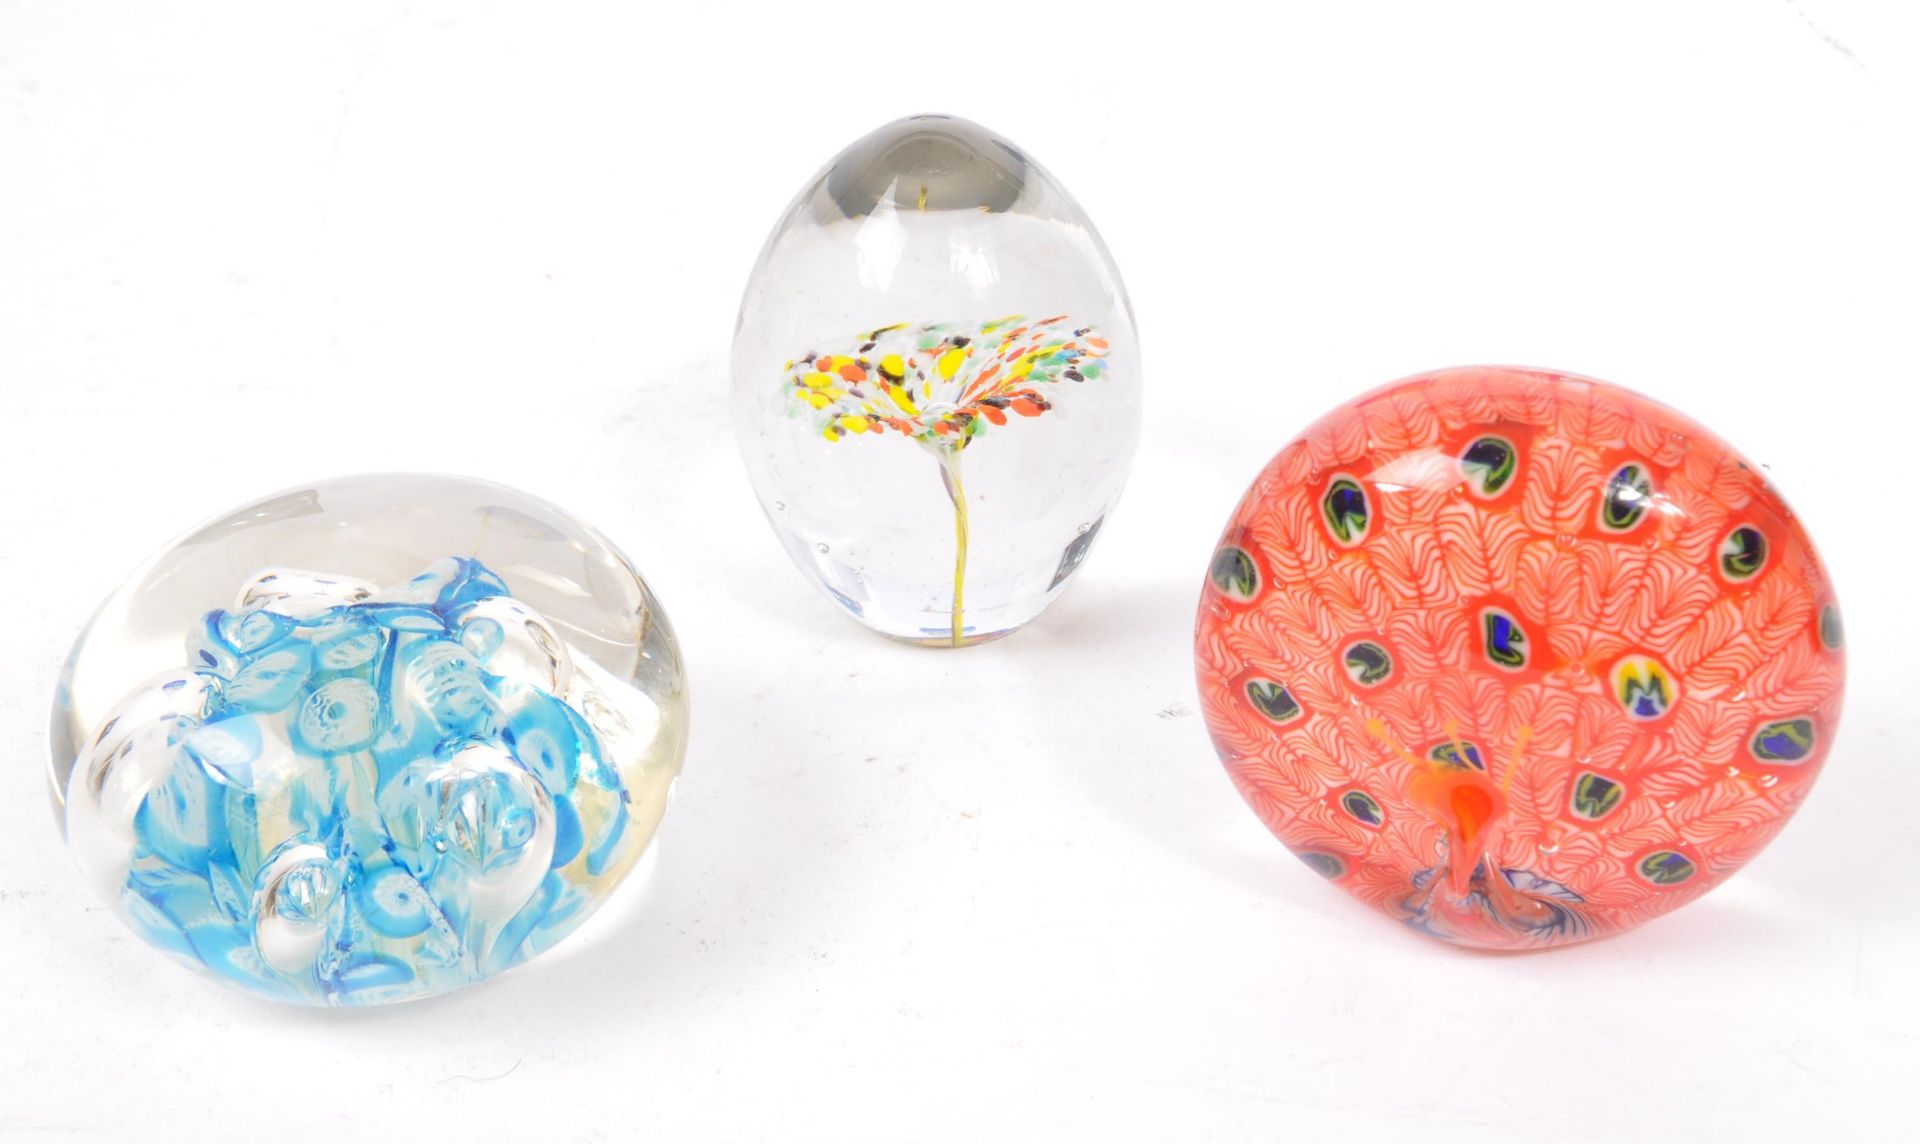 COLLECTION OF VINTAGE STUDIO ART GLASS PAPERWEIGHTS - Image 4 of 5